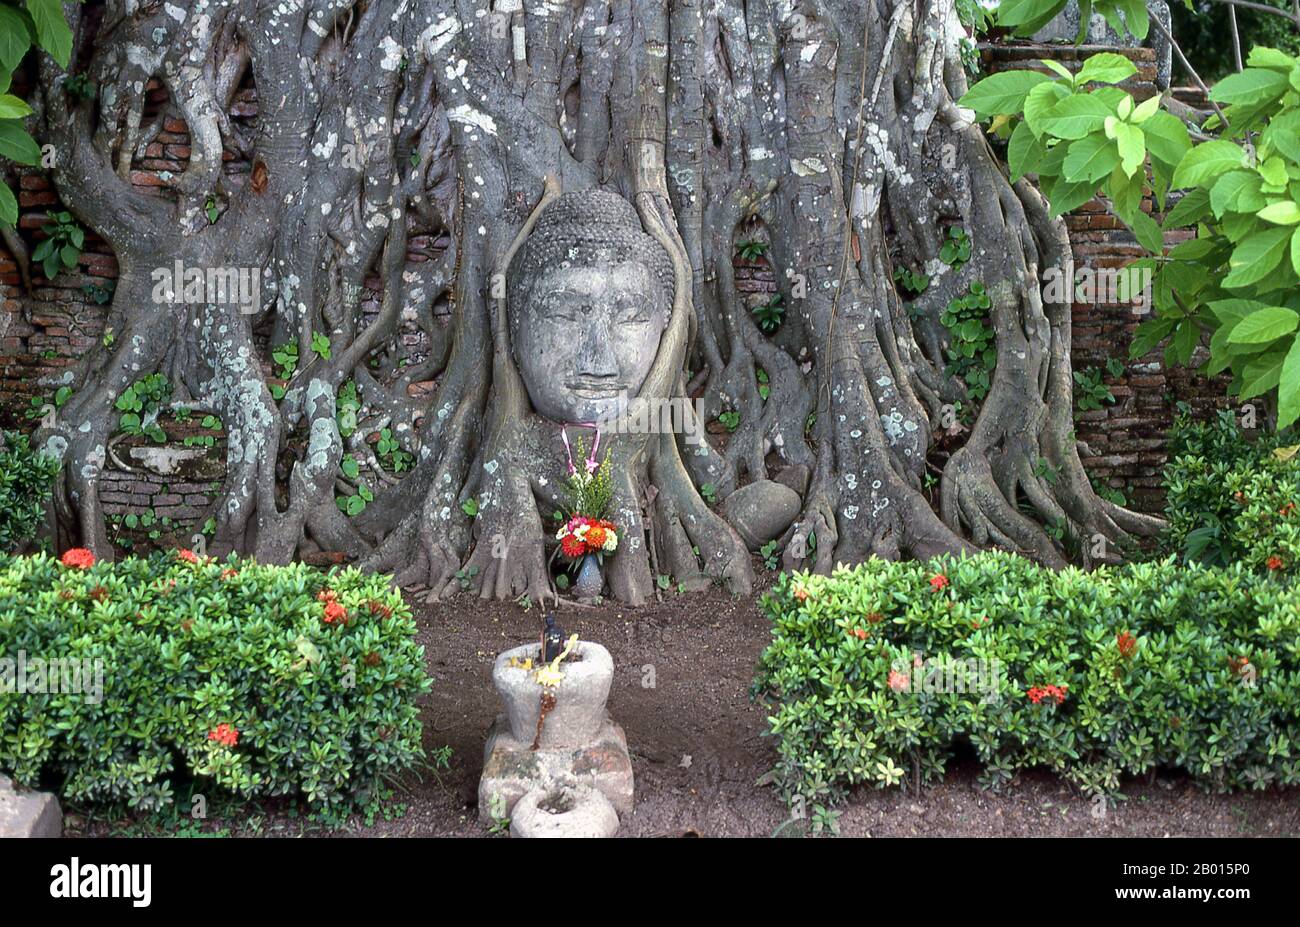 Thailand: Buddha head entwined by the roots of a bodhi tree, Wat Phra Mahathat, Ayutthaya Historical Park.  Wat Phra Mahathat was built during the reign of Borommaracha I (Boromma Rachathirat I) or Khun Luang Pa Ngua (1370- 1388), who was the third king of the Ayutthaya Kingdom.  Ayutthaya (Ayudhya)) was a Siamese kingdom that existed from 1351 to 1767. Ayutthaya was friendly towards foreign traders, including the Chinese, Vietnamese (Annamese), Indians, Japanese and Persians, and later the Portuguese, Spanish, Dutch and French, permitting them to set up villages outside the city walls. Stock Photo